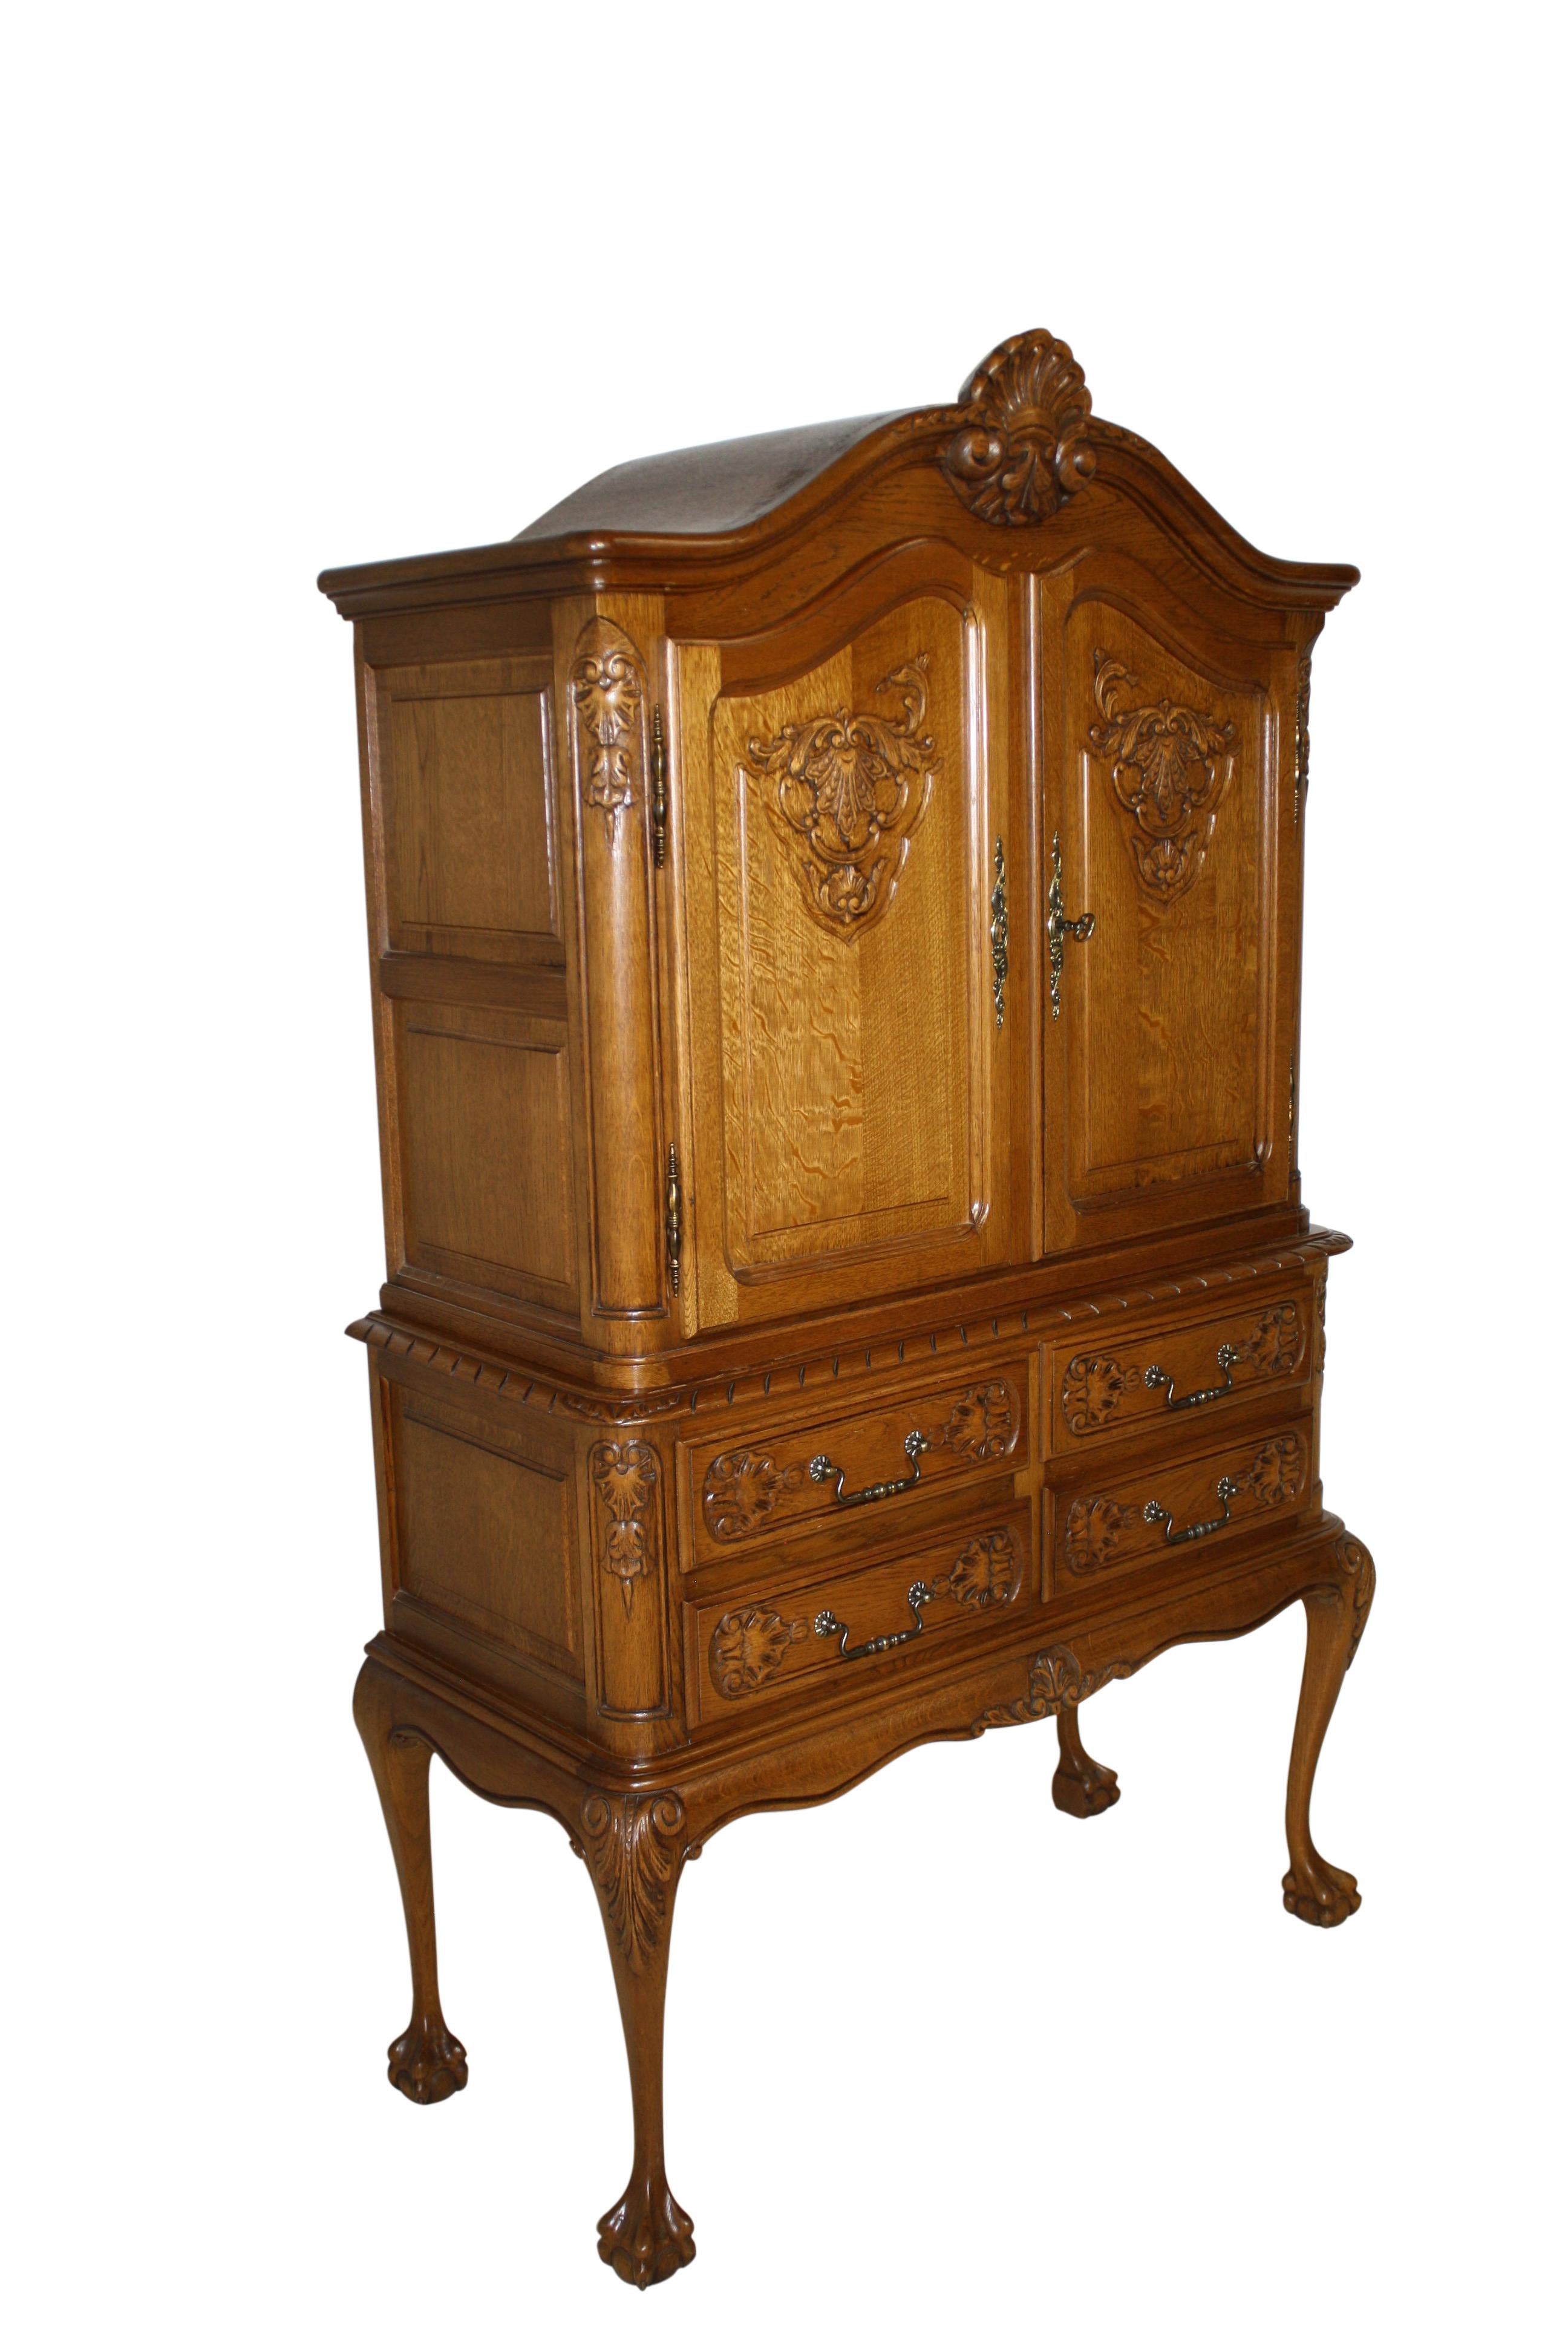 The soft curves of an arched bonnet cornice embellished with a central carved shell, rounded corners, and a scalloped apron are featured in this elegant cabinet, which is raised on long, slender cabriole legs that terminate in ball and claw feet.